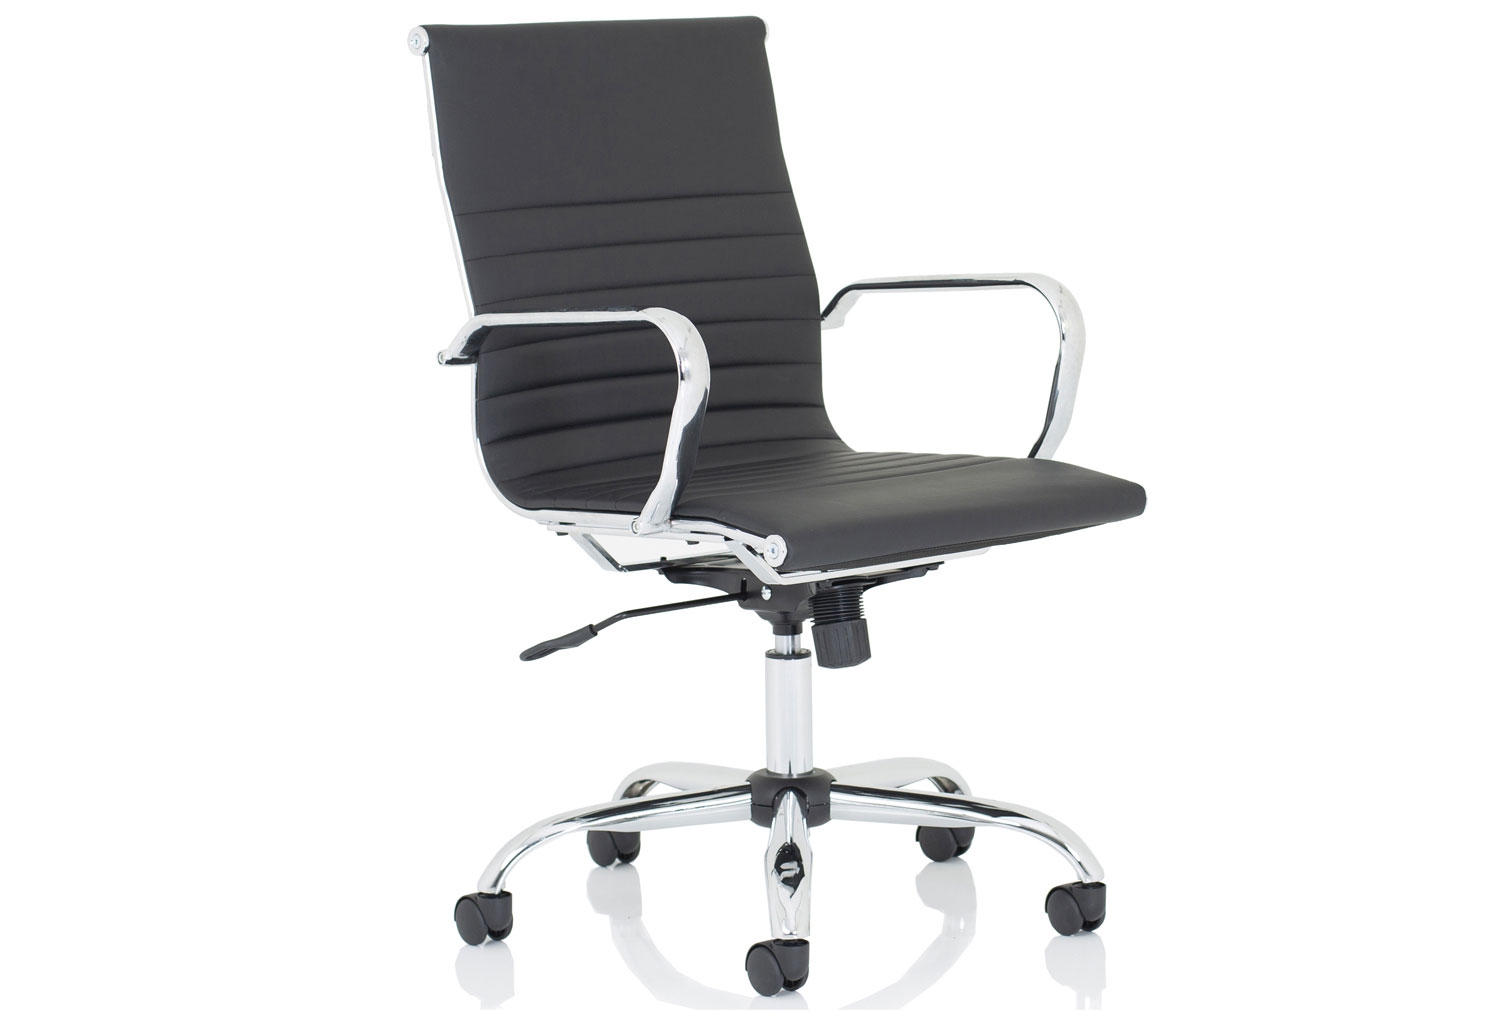 Besos Medium Back Bonded Leather Executive Office Chair (Black), Fully Installed